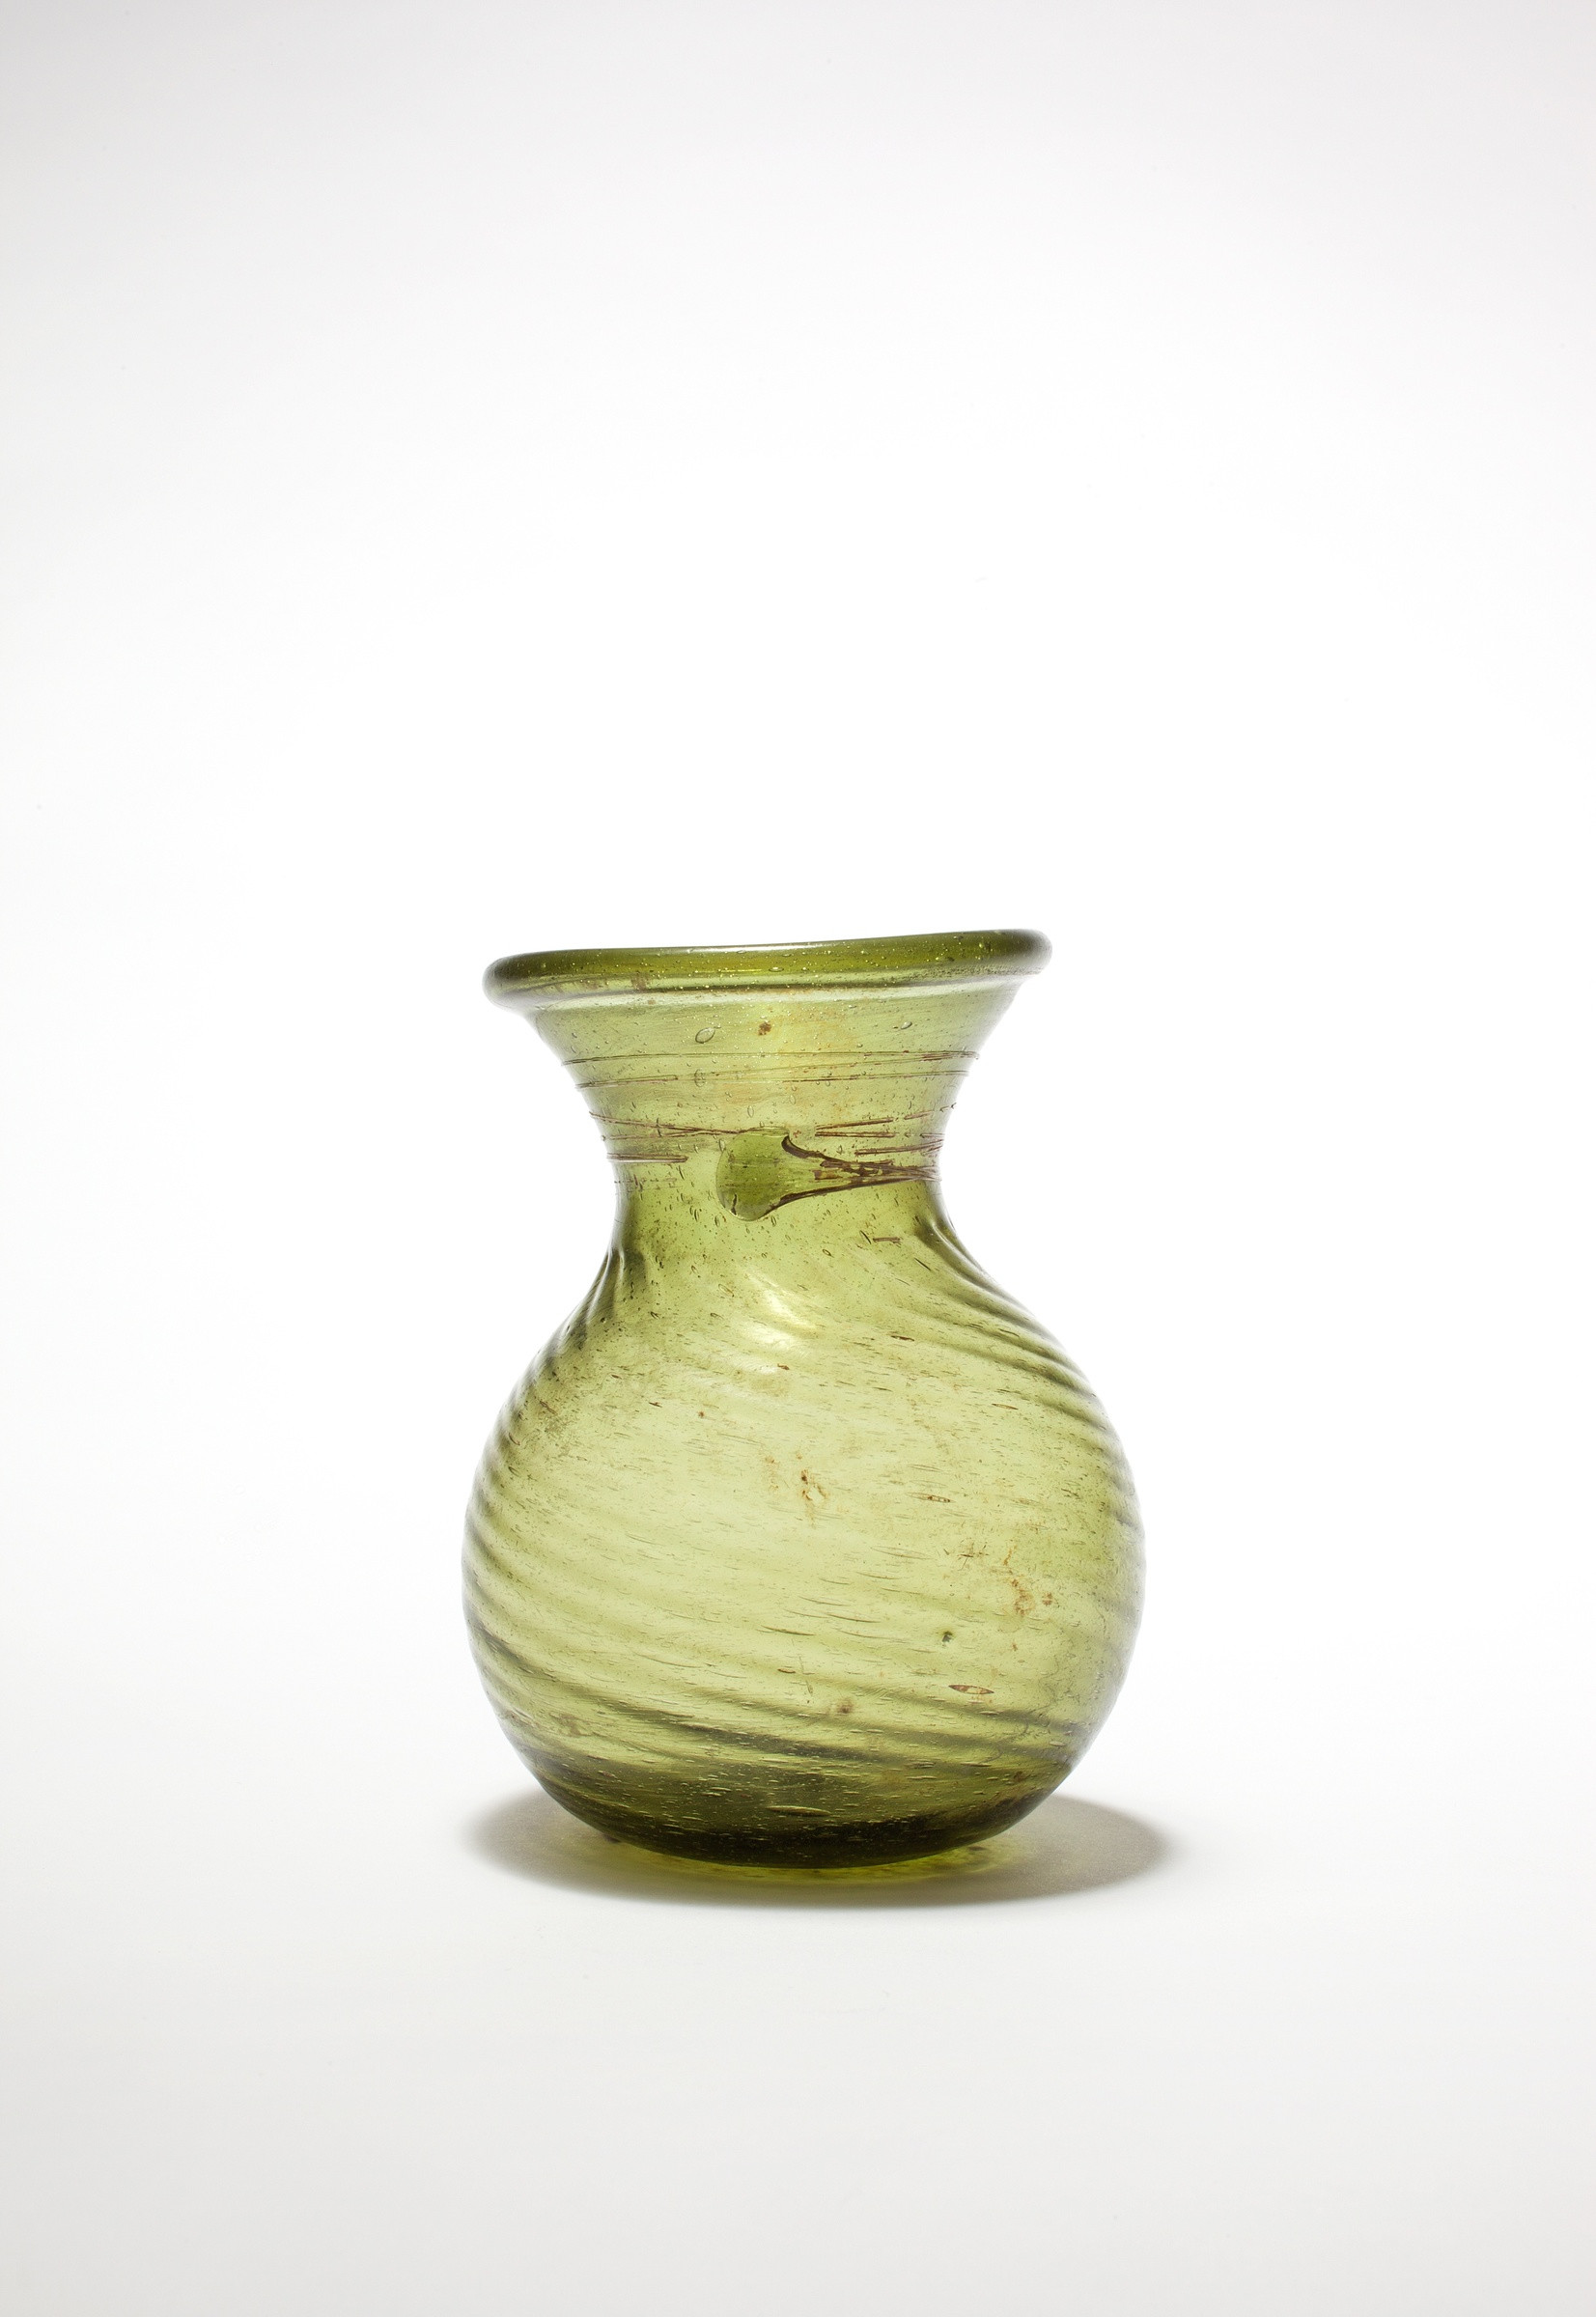 14 Fantastic Yellow Ceramic Vase 2024 free download yellow ceramic vase of anglo saxon glass globular beaker 6th 7th century ad charles ede in anglo saxon glass globular beaker